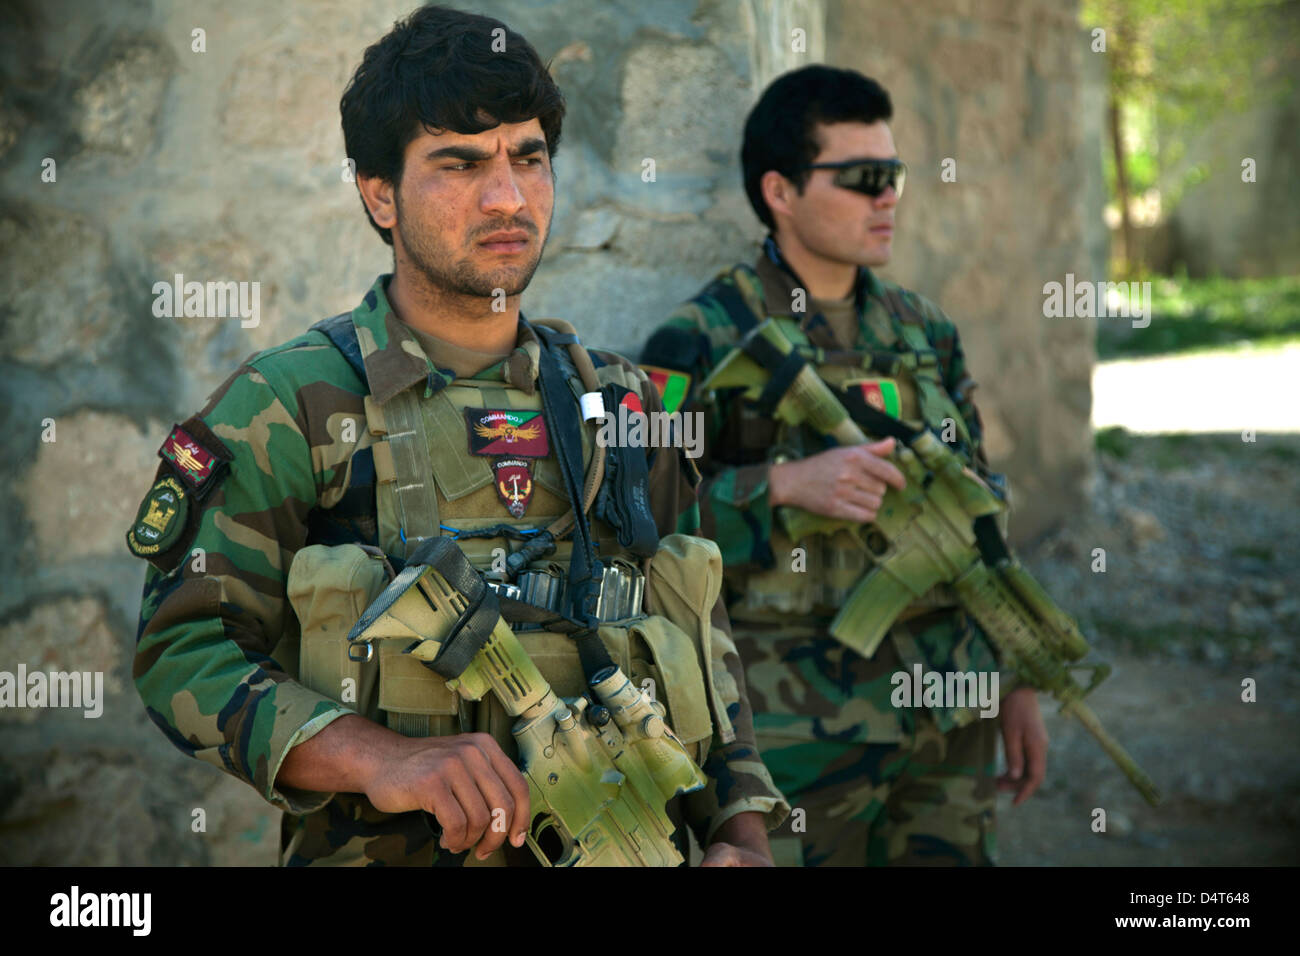 An Afghan National Army Special Forces commandos maintain security during an Afghan Local Police recruitment validation March 16, 2013 in Helmand province, Afghanistan. Stock Photo